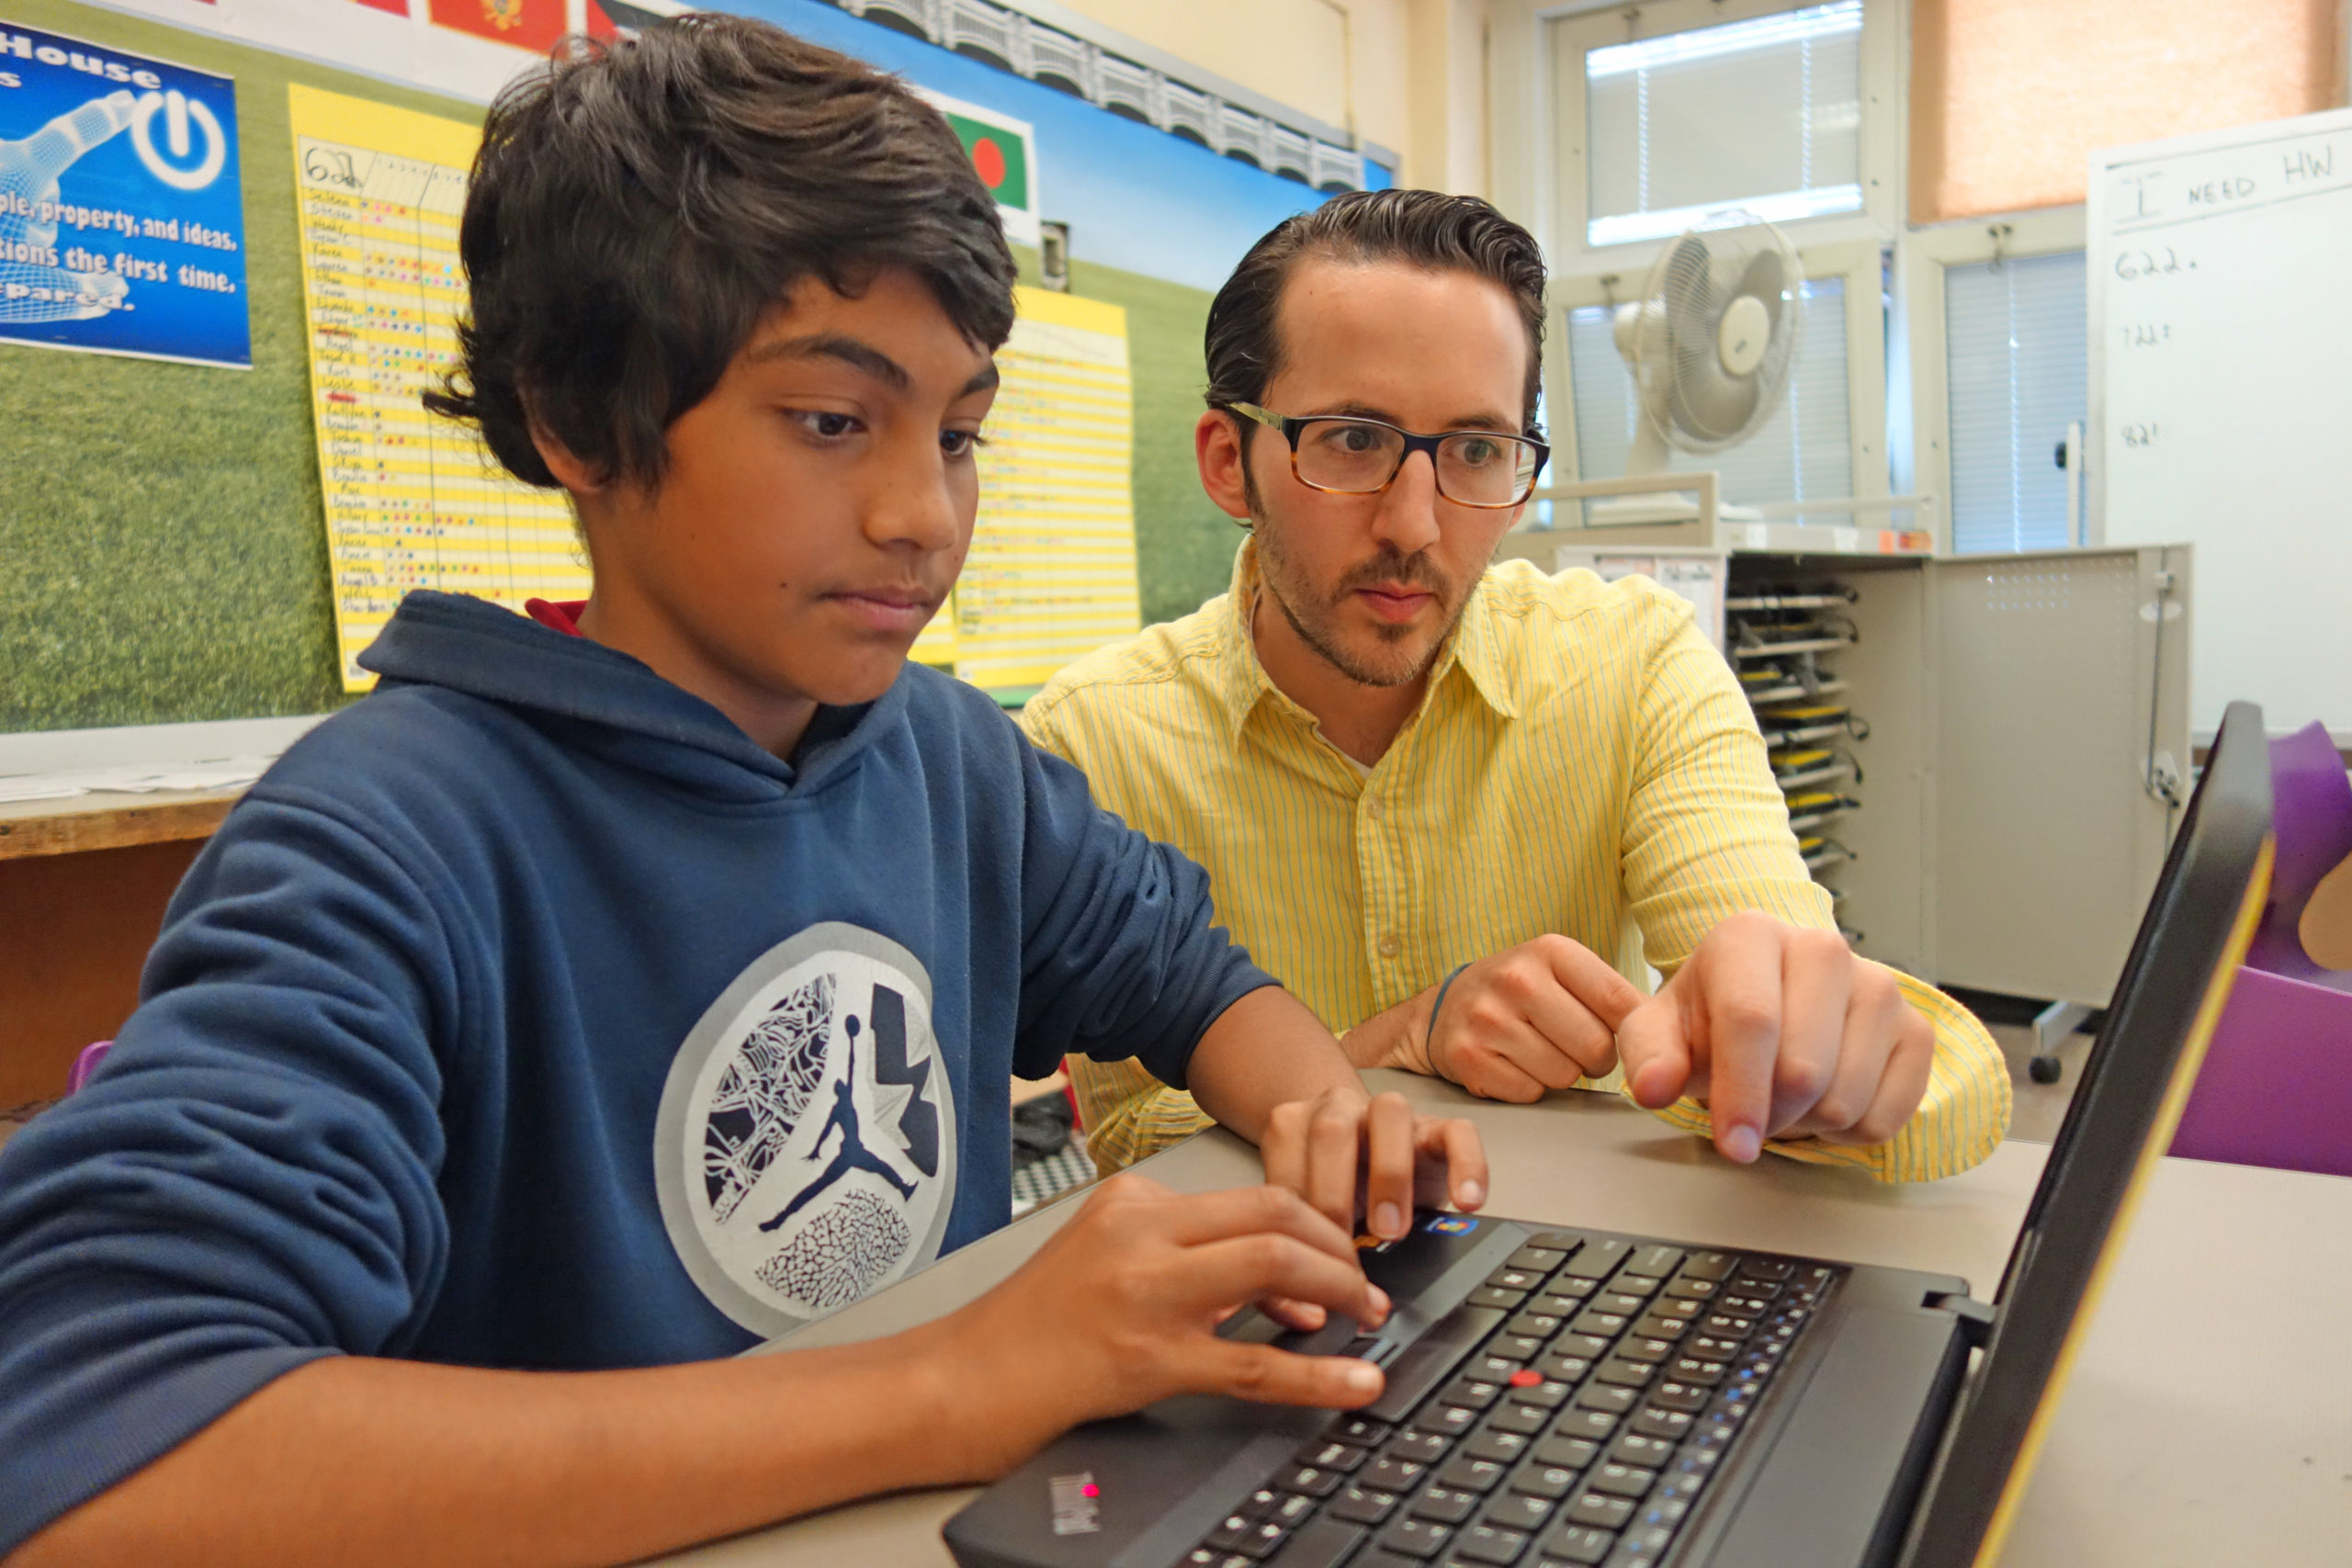 Teacher and Student looking at a laptop computer